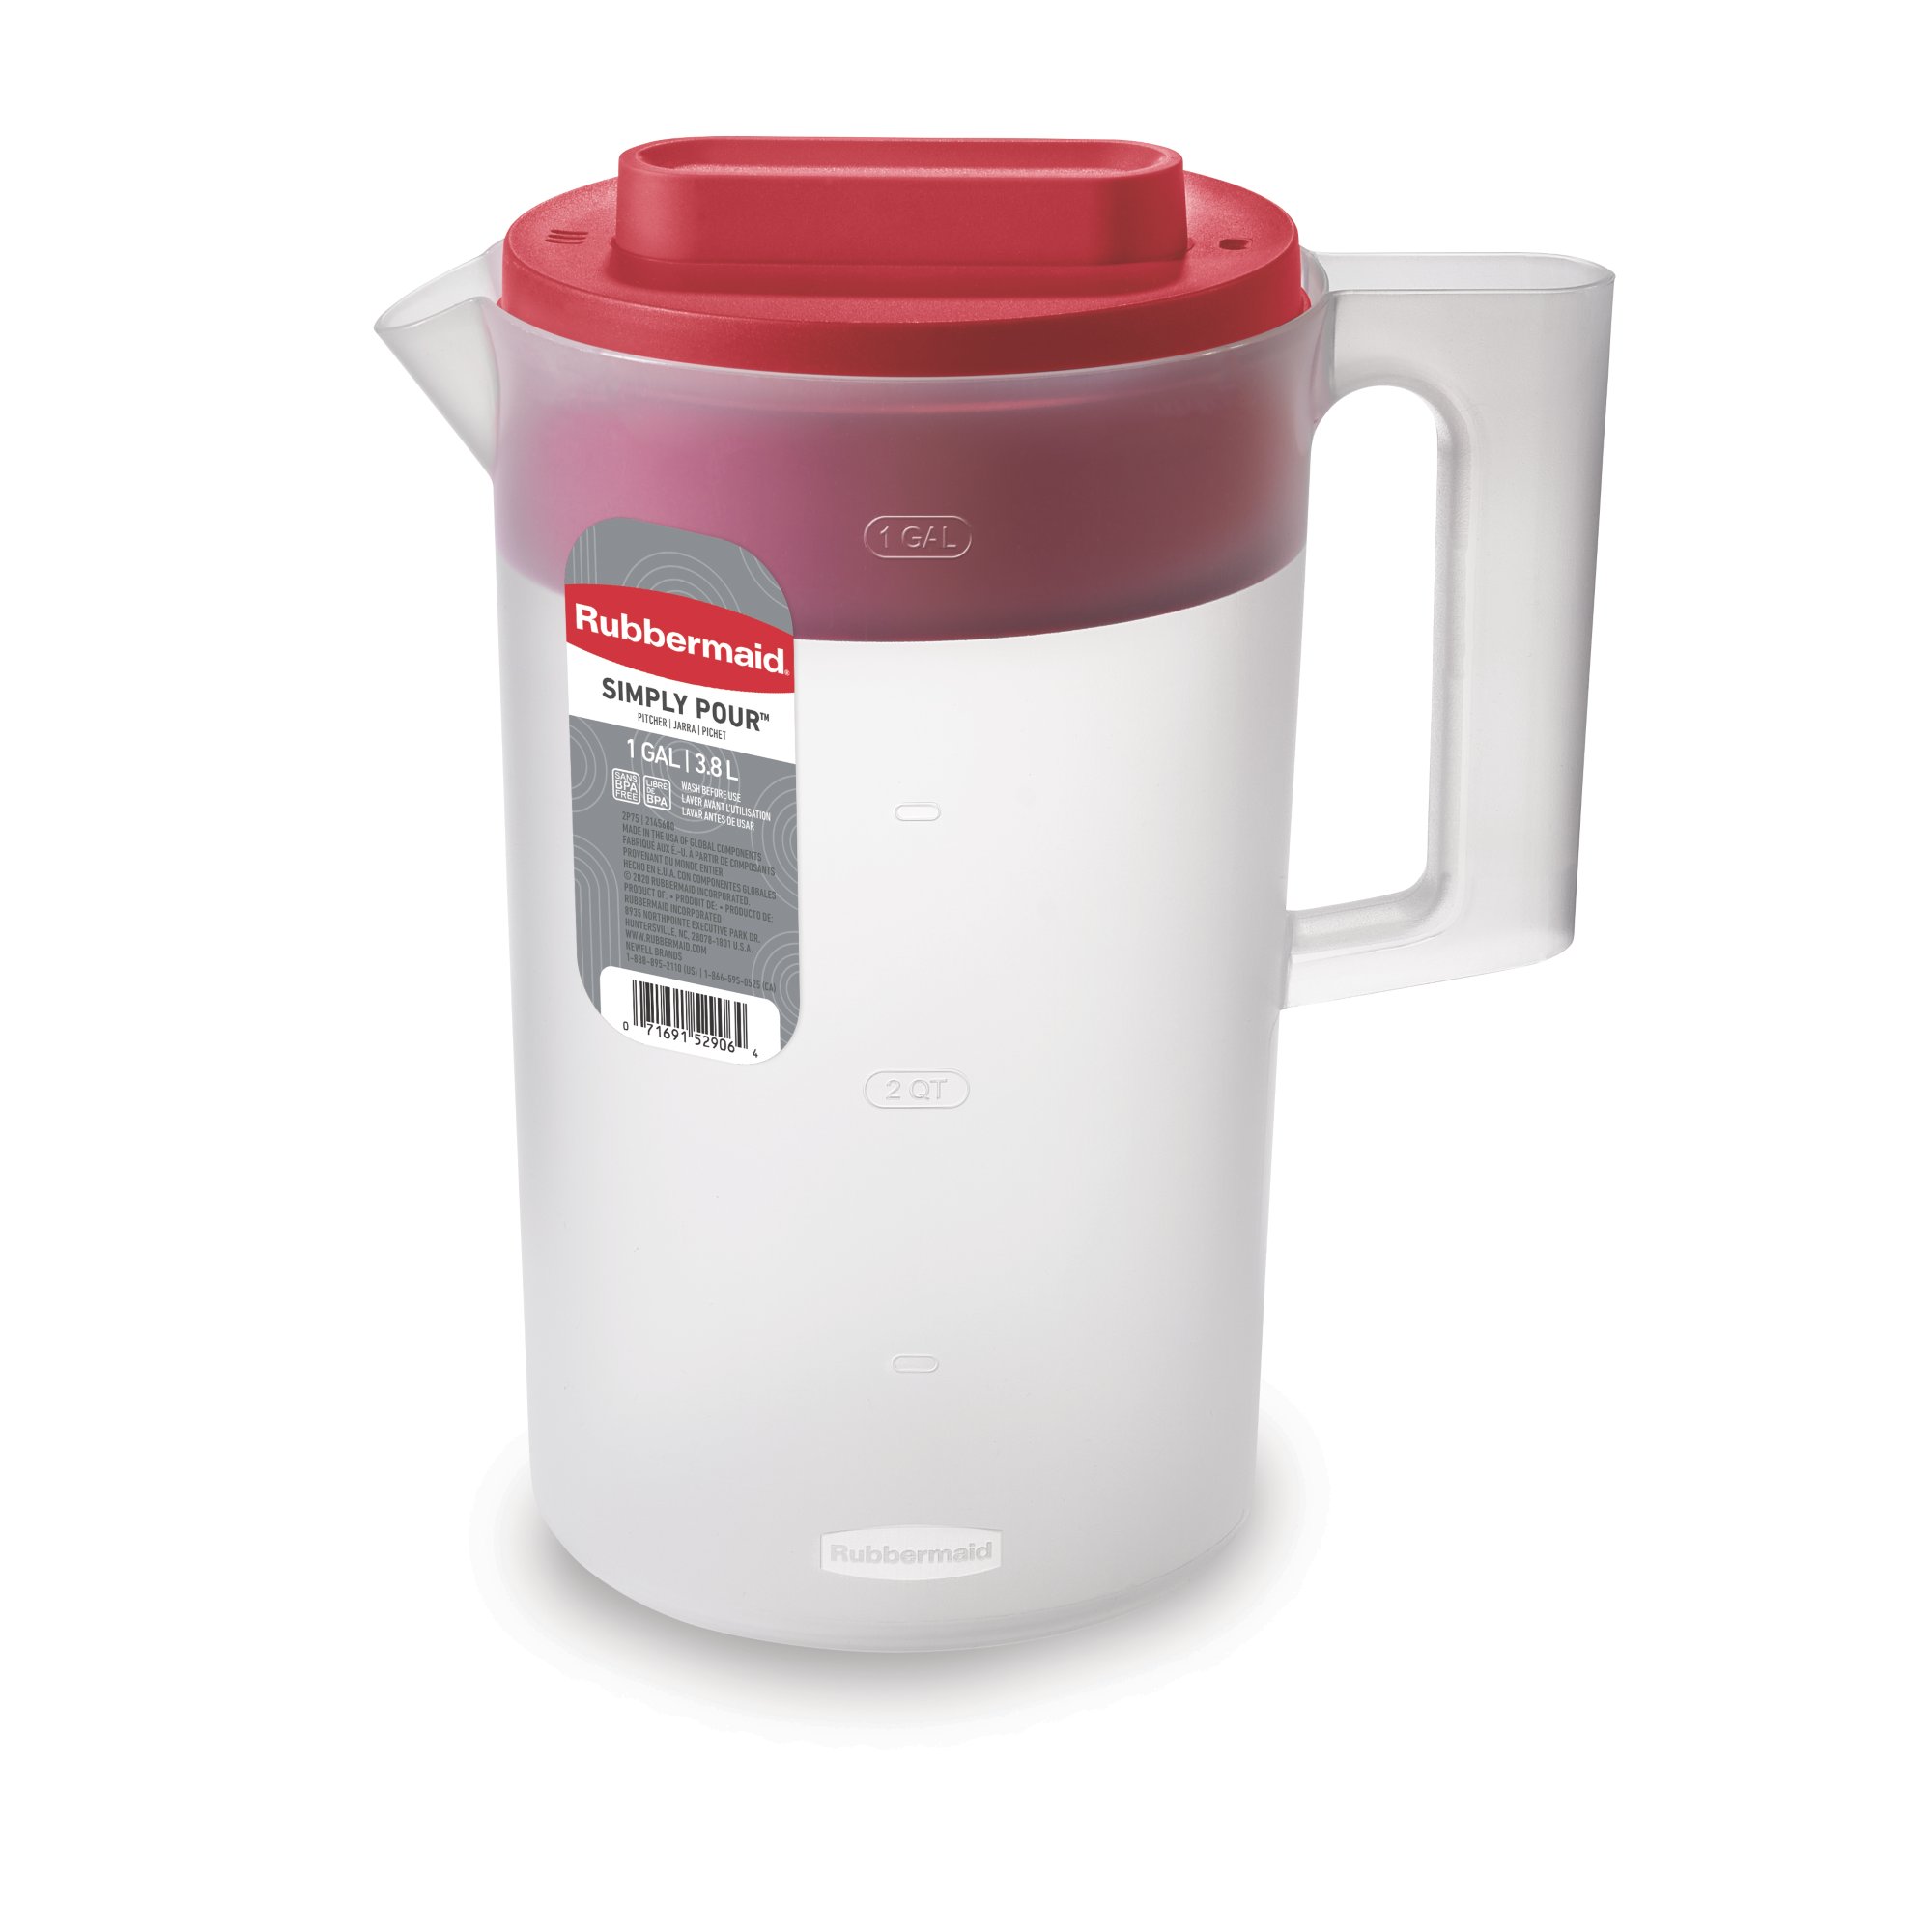 https://s7d9.scene7.com/is/image/NewellRubbermaid/2122601-rubbermaid-food-storage-simply-pour-pitcher-premium-lid-1g-red-in-pack-straight-on?wid=2000&hei=2000